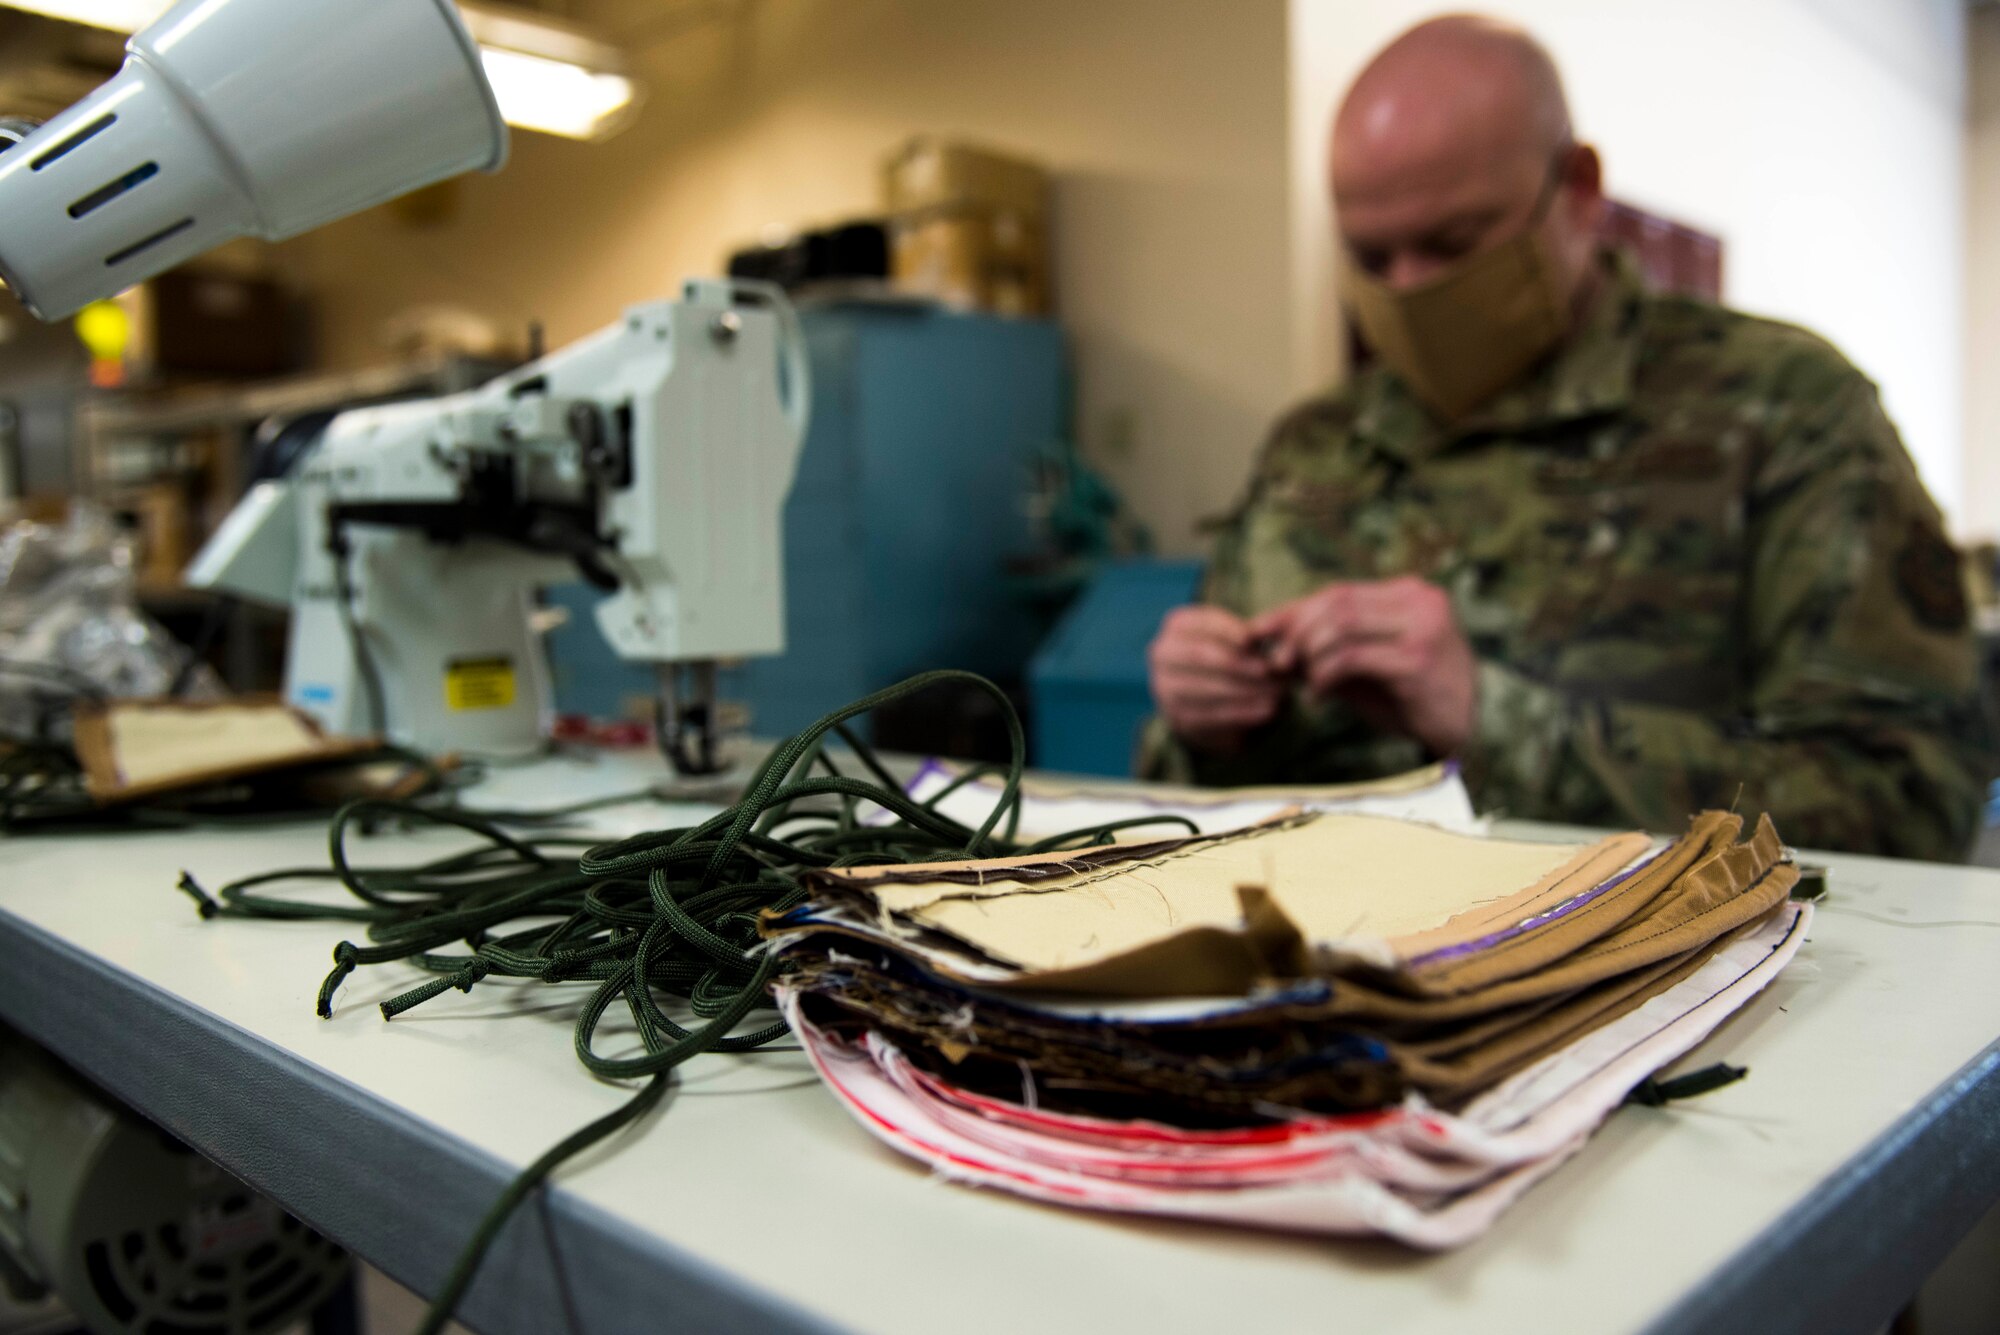 U.S. Air Force Master Sgt. Shawn Freed, 92nd Operation Support Squadron Aircrew Flight Equipment superintendent, prepares a new stack of protective facemasks to sew and create for Airmen to wear at Fairchild Air Force Base, Washington, April 10, 2020. So far, AFE have produced over 650 protective facemasks for Airmen on the installation to wear. (U.S. Air Force photo by Senior Airman Jesenia Landaverde)